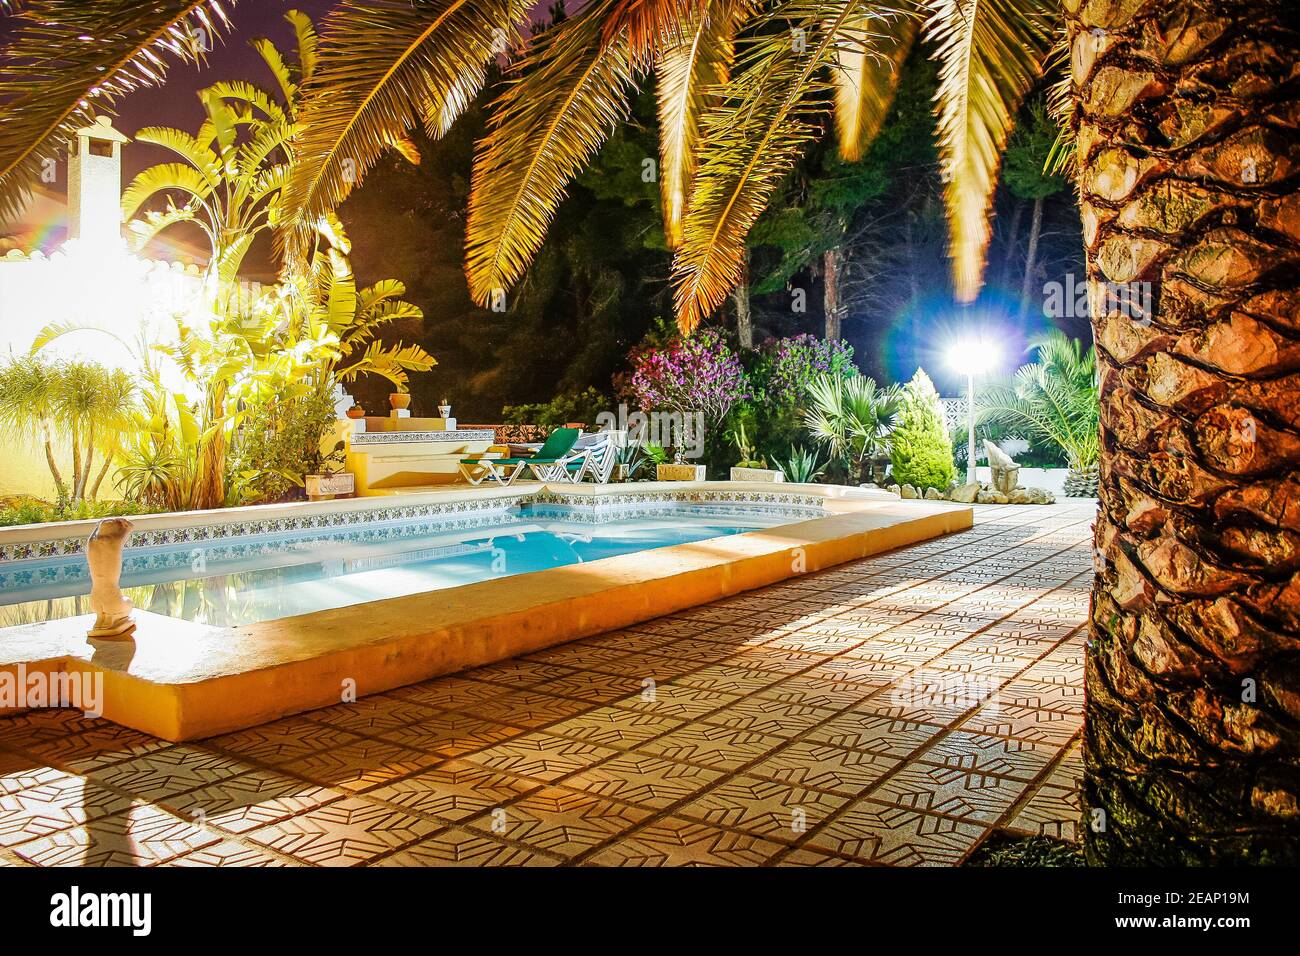 Swimming pool at night set in a mature garden at a classic Spanish villa in Moraira, Spain Stock Photo